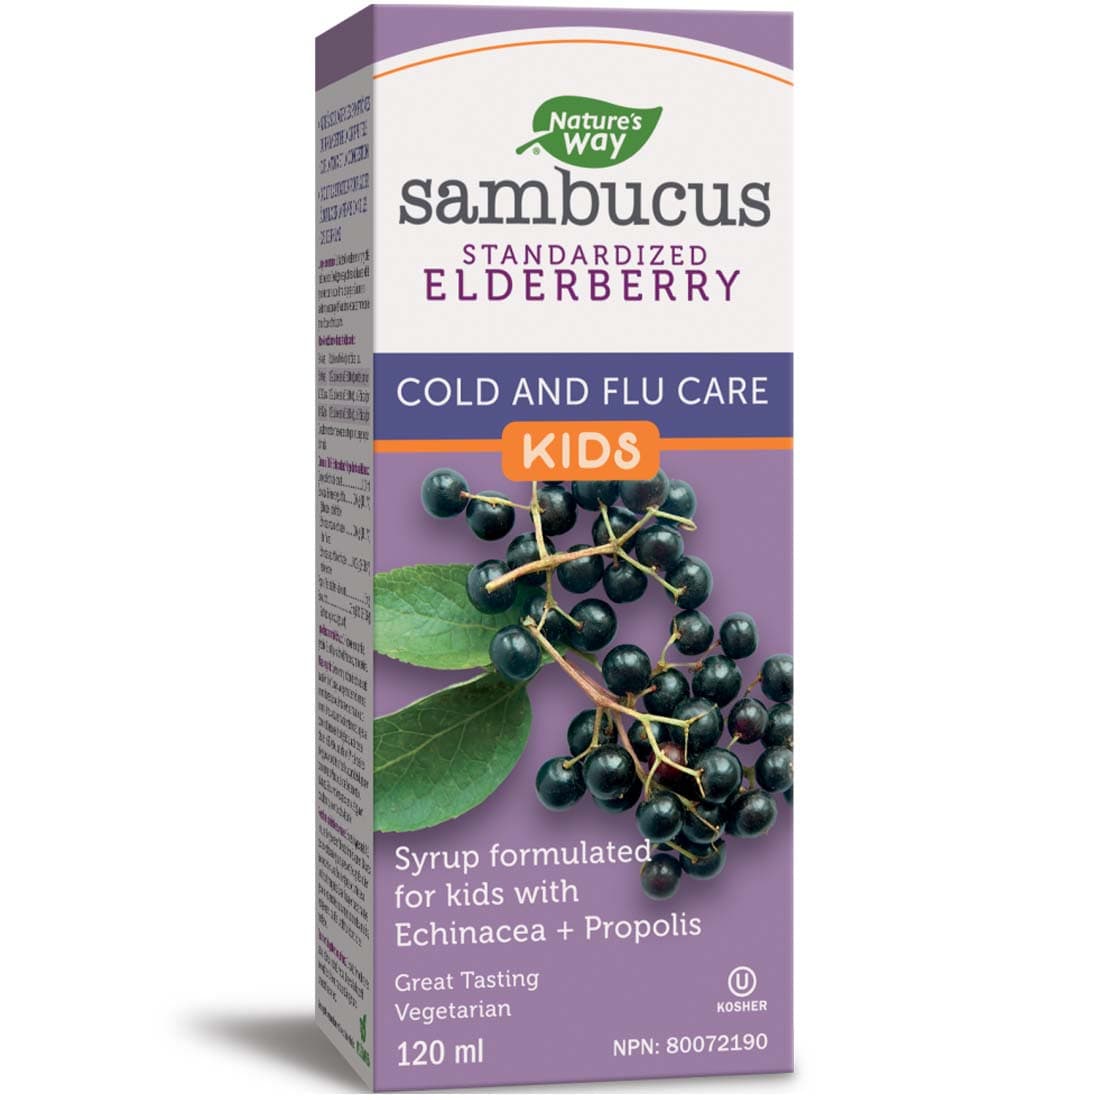 Nature's Way Kids Sambucus Elderberry Cold and Flu Care Syrup (with Echinacea & Propolis), 120ml